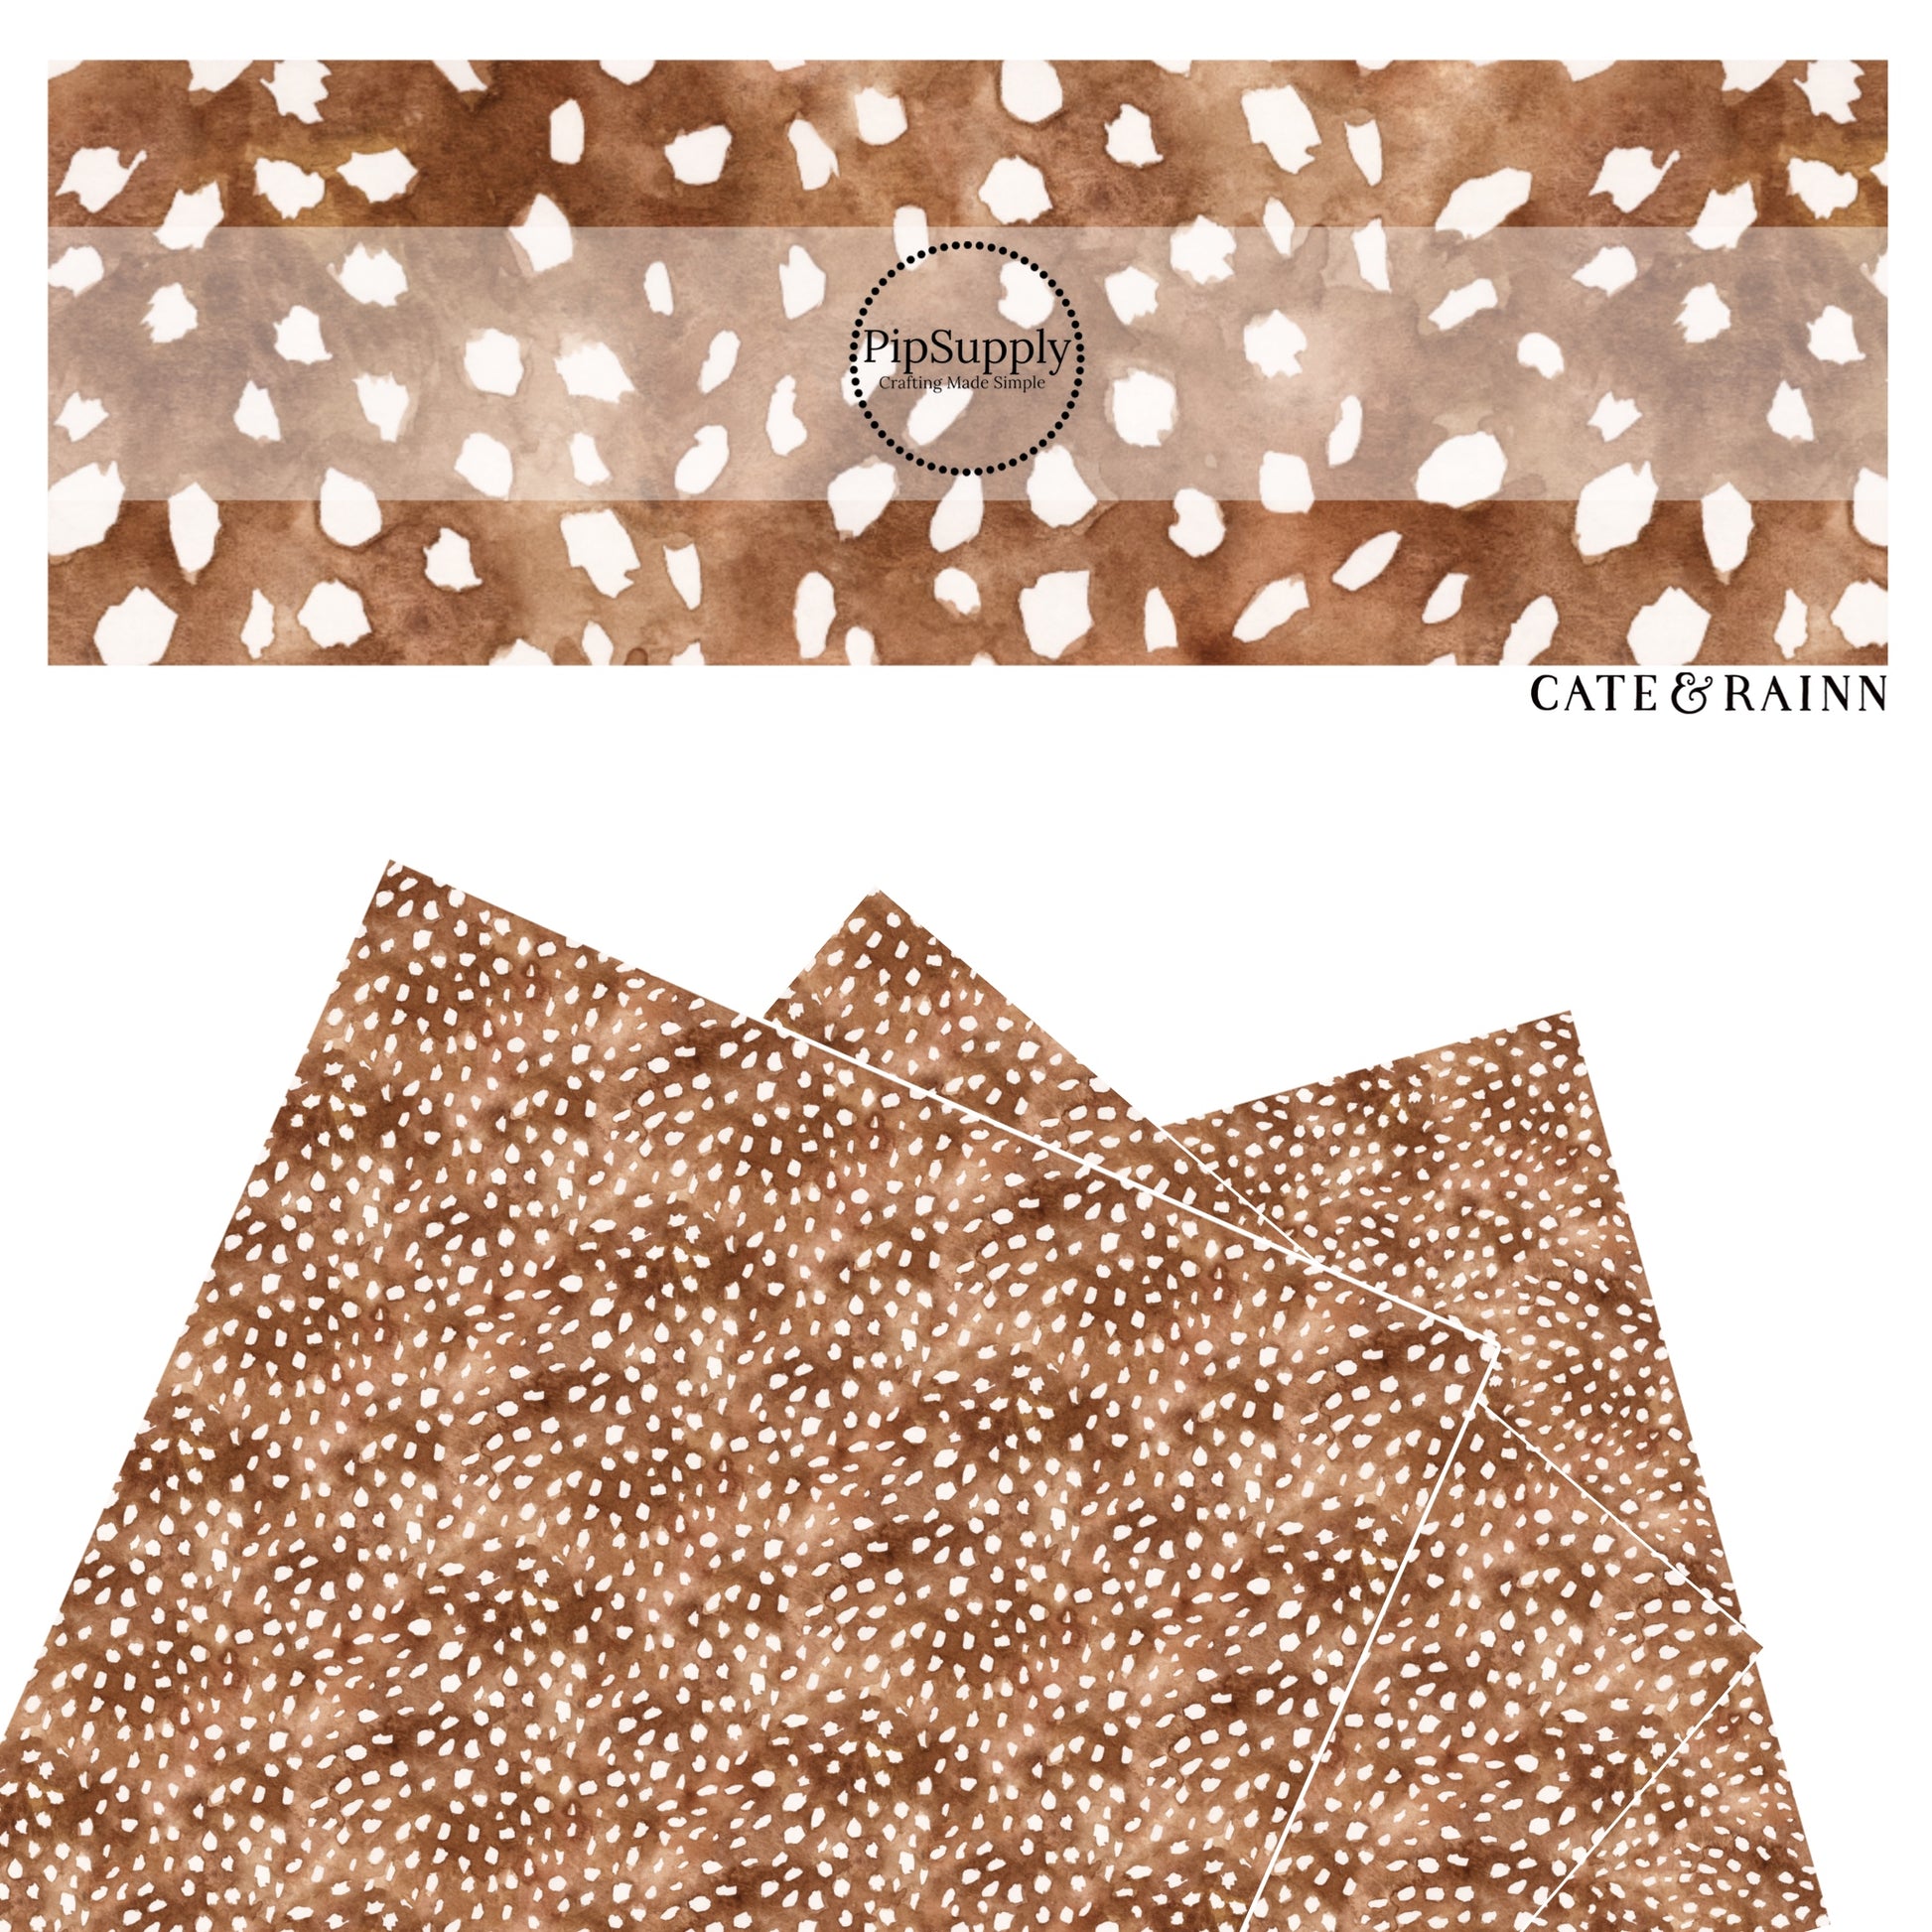 These spring pattern themed faux leather sheets contain the following design elements: fawn print pattern. Our CPSIA compliant faux leather sheets or rolls can be used for all types of crafting projects.